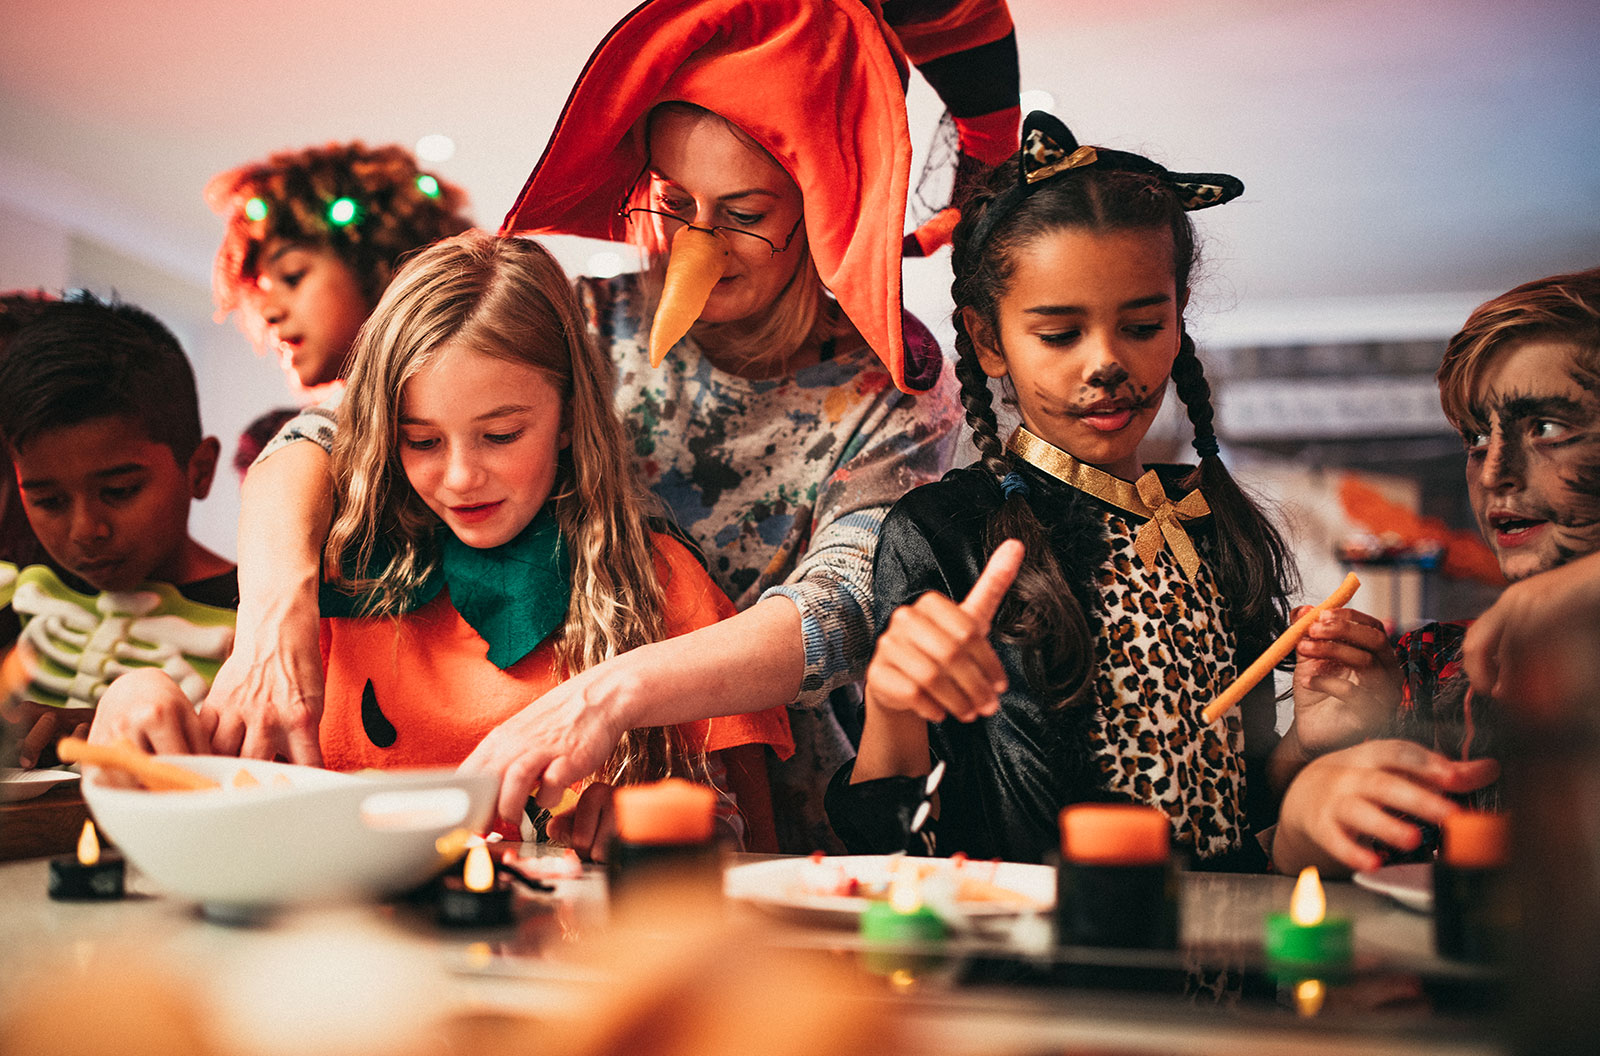 Costumed children sitting in a line deciding which foods to eat while at a Halloween party